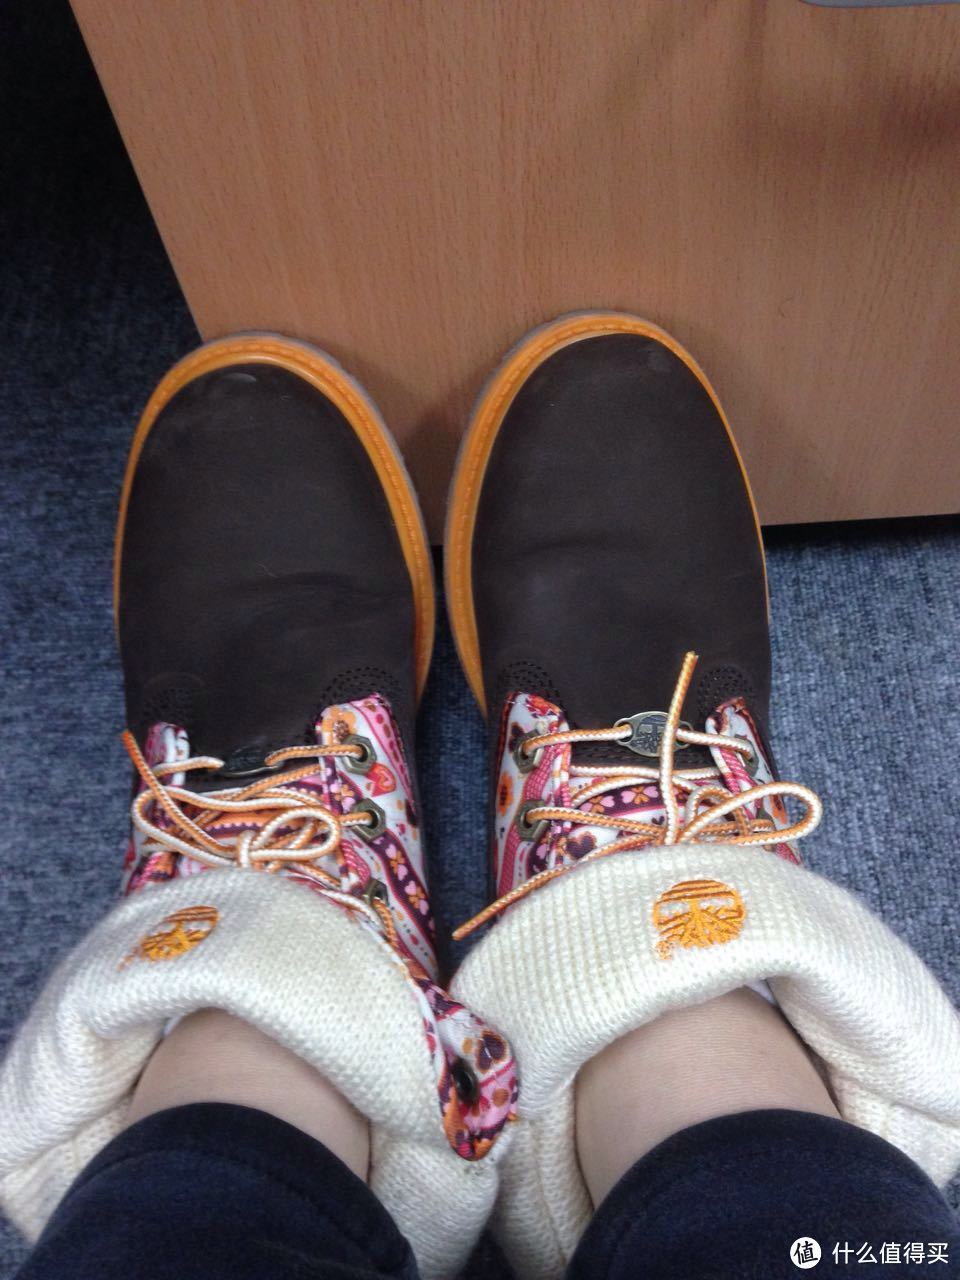 Timberland 添柏岚 roll top boots 女士翻口靴